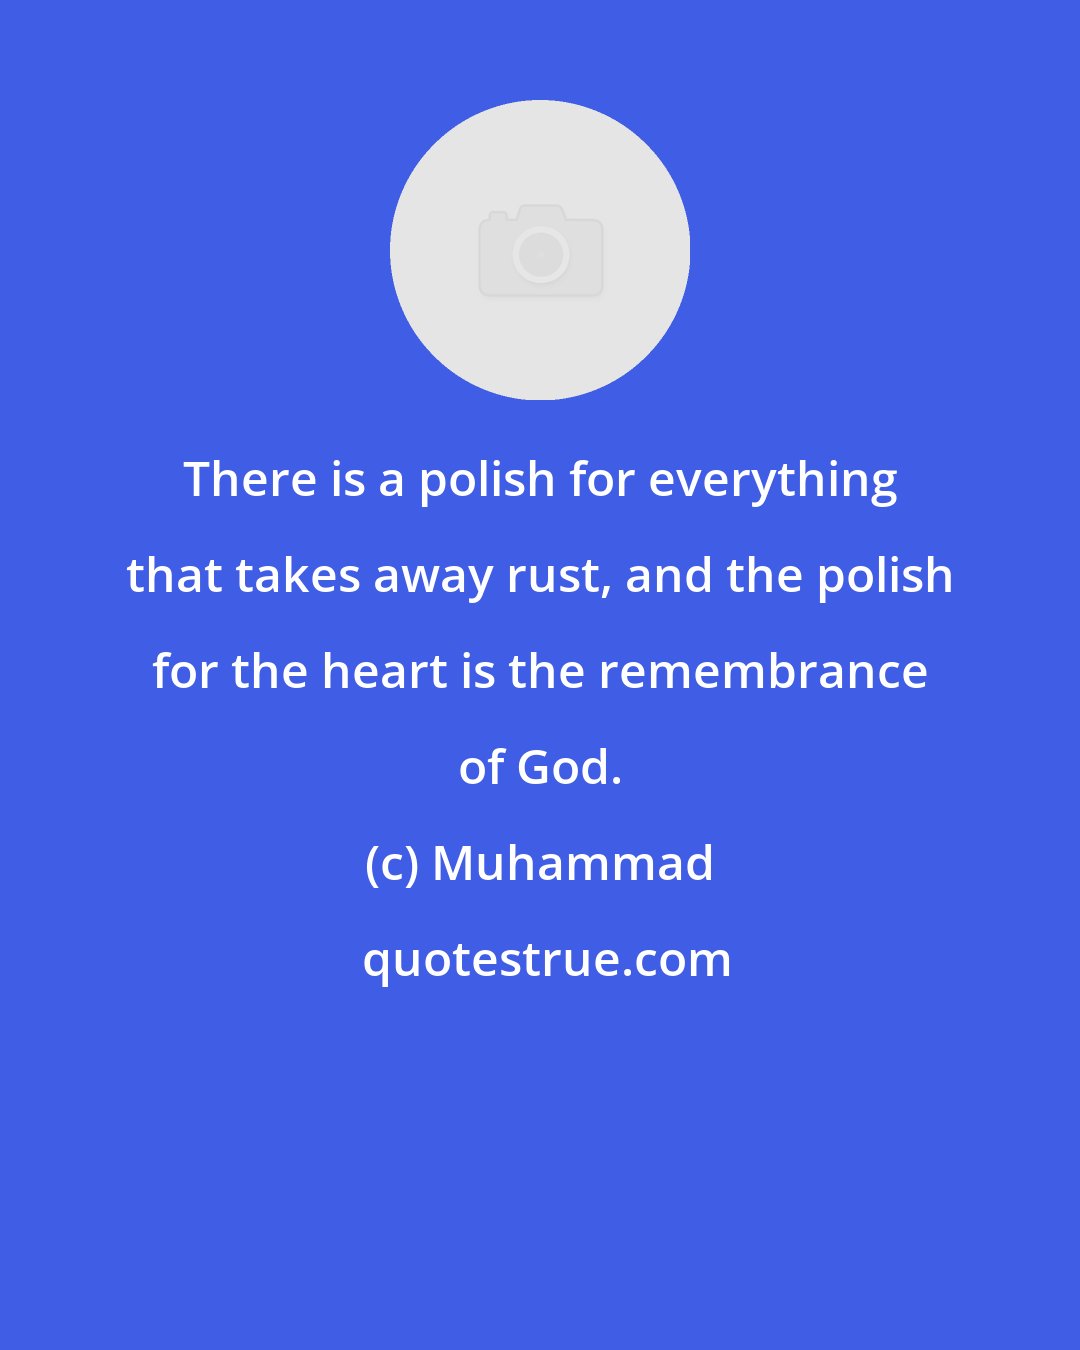 Muhammad: There is a polish for everything that takes away rust, and the polish for the heart is the remembrance of God.